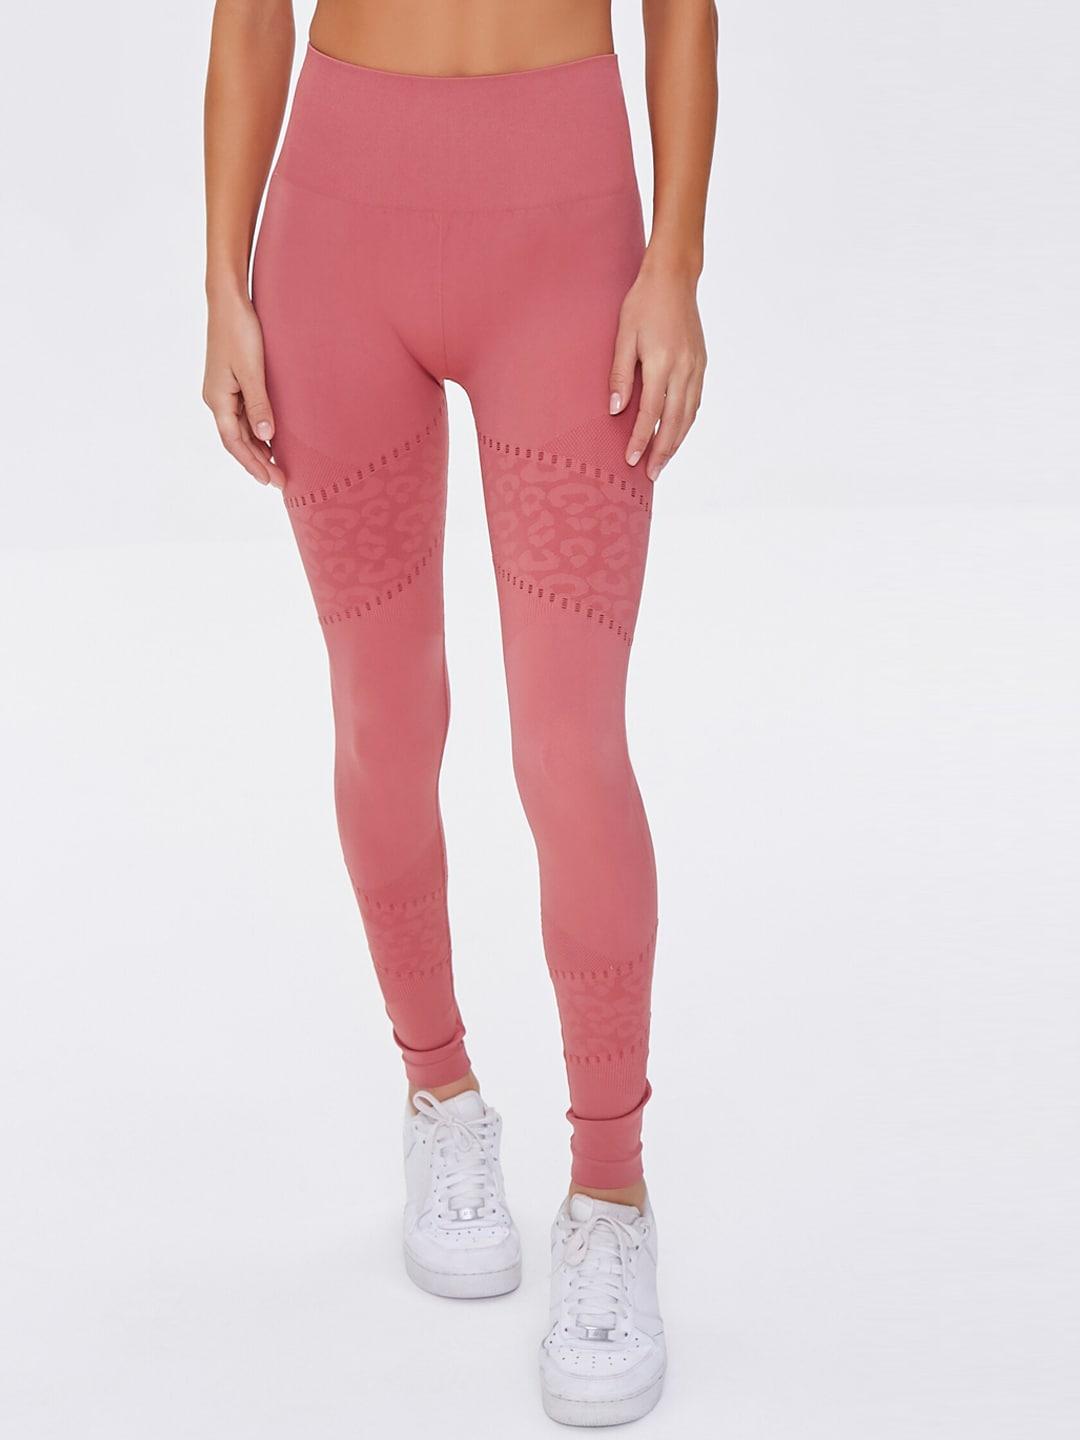 forever-21-women-pink-animal-print-sports-tights